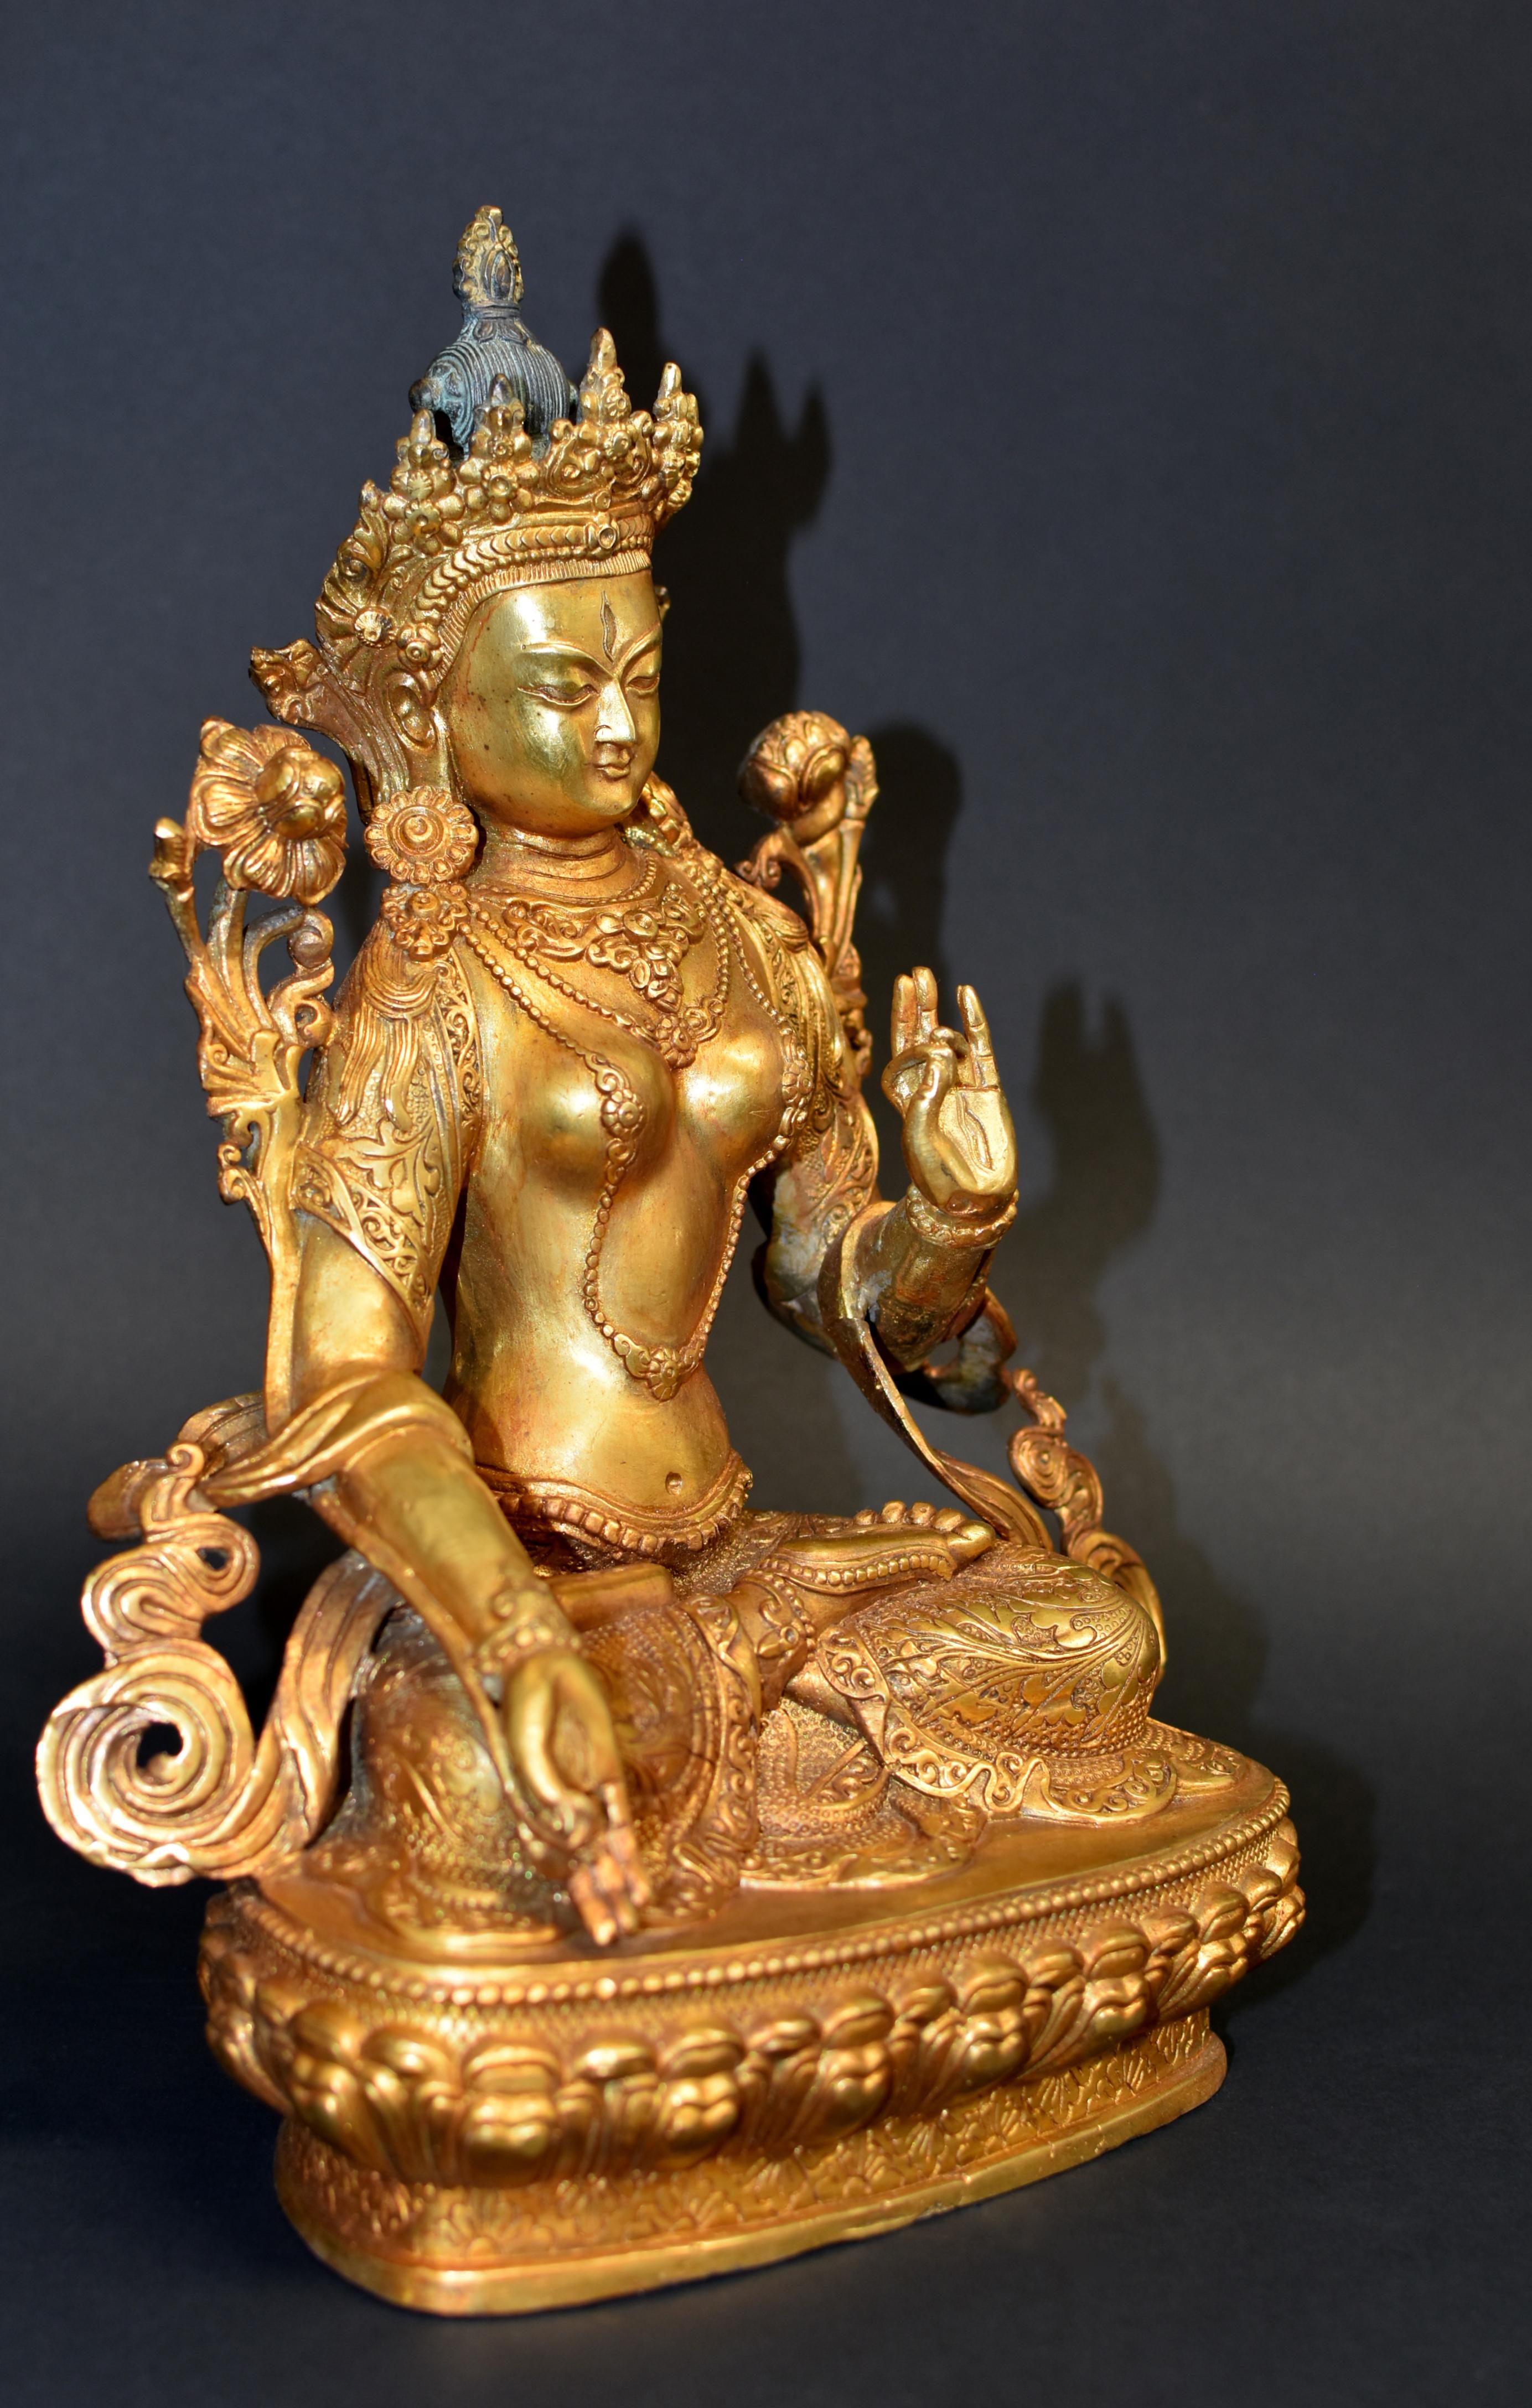 A beautiful 7.6 lb statue of Tibetan Bodhisattva White Tara. The White Tara is regarded as the consort of Avalokiteswara, the Goddess of Great Compassion. Seated in full vajra posture, her right hand in boon conferring mudra while the left hand in